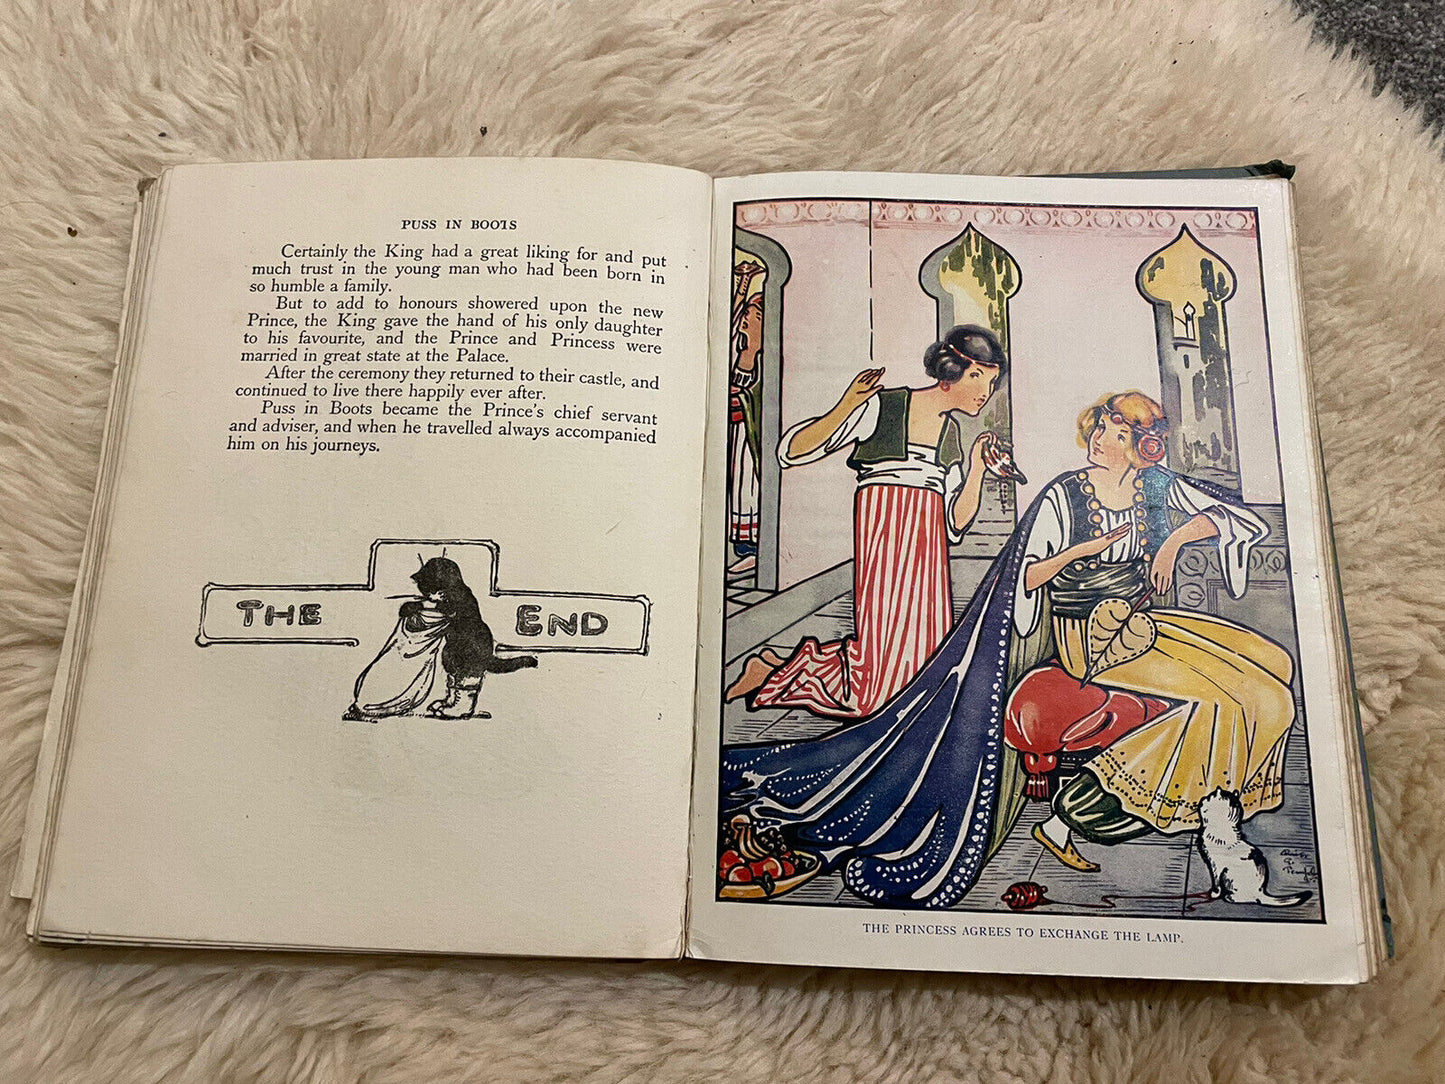 MY FAIRY STORY BOOK Colour Illustrations by Temple FAIRY TALES 1925